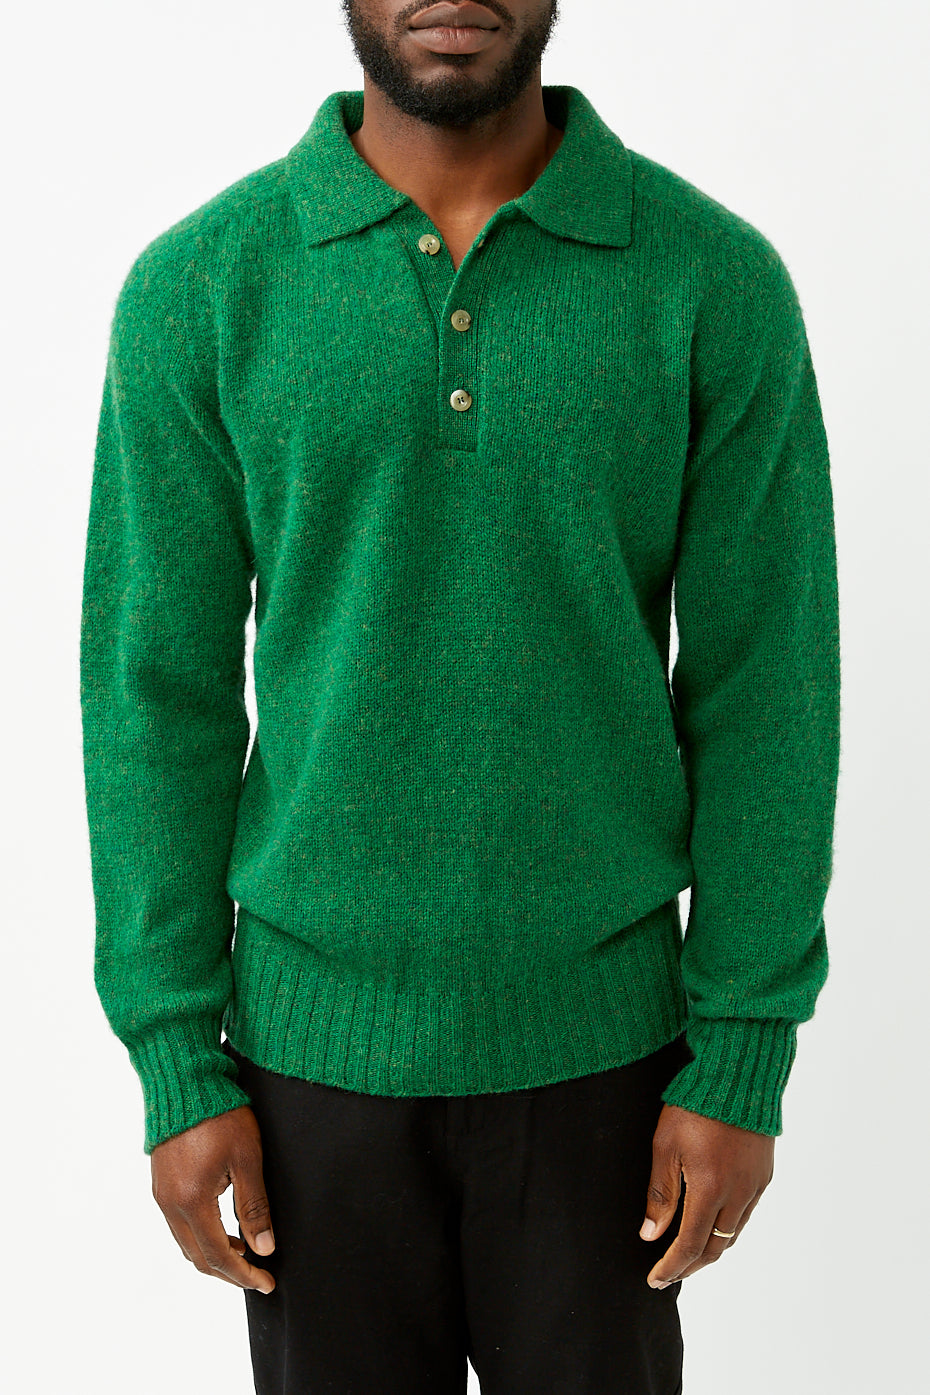 Howlin' Greenlover Ghost Pressure Polo Knit